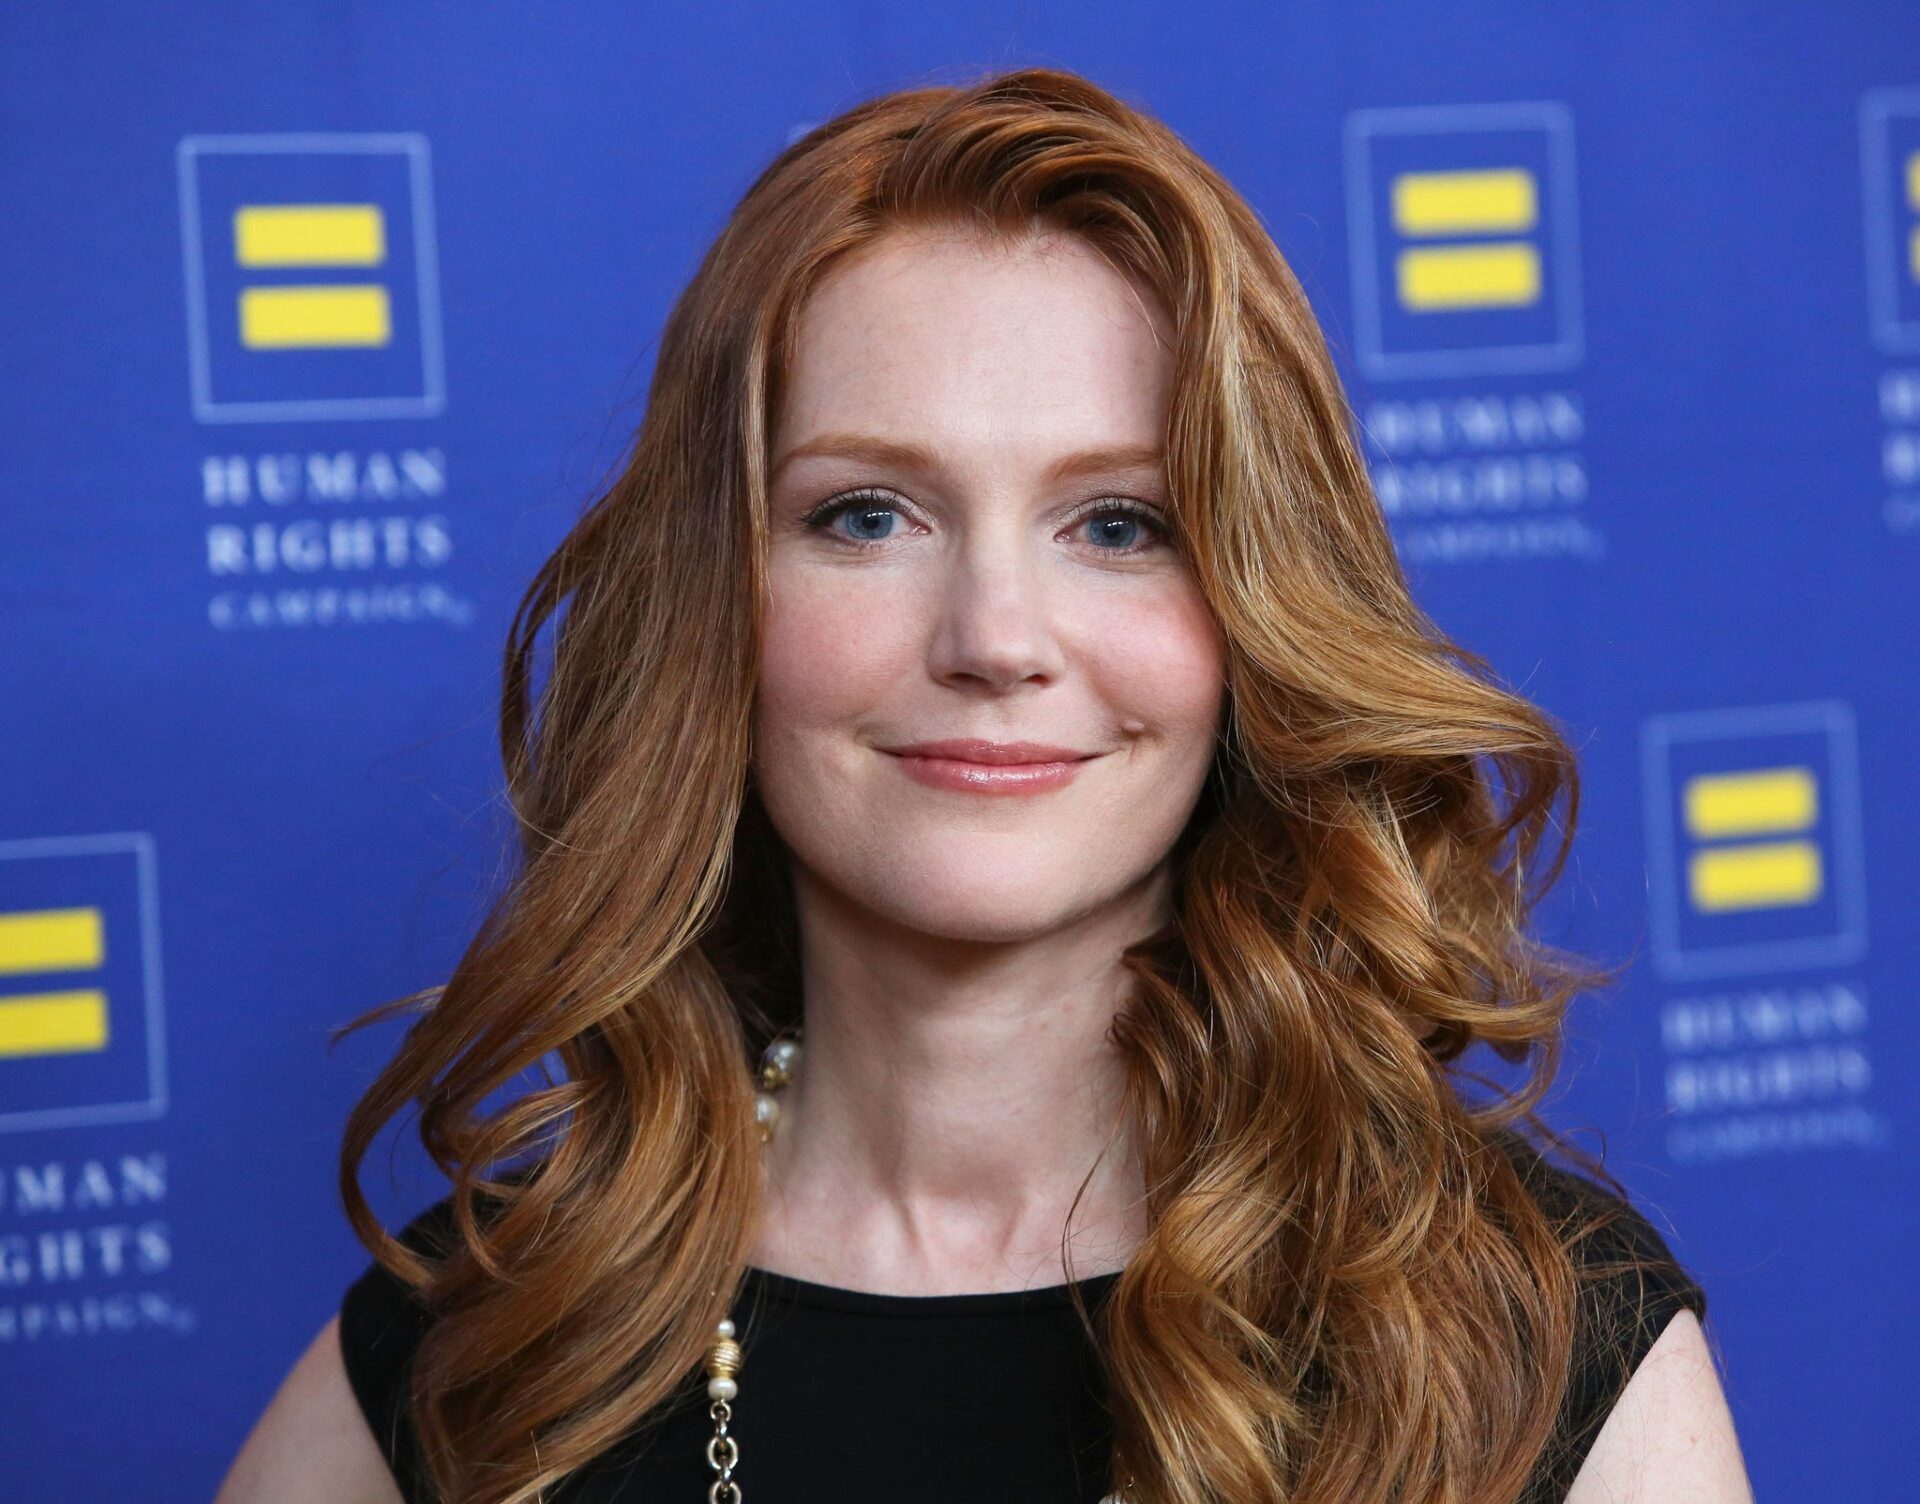 Darby Stanchfield Biography: Age, Net Worth, Instagram, Spouse, Height, Wiki, Parents, Awards, Movies